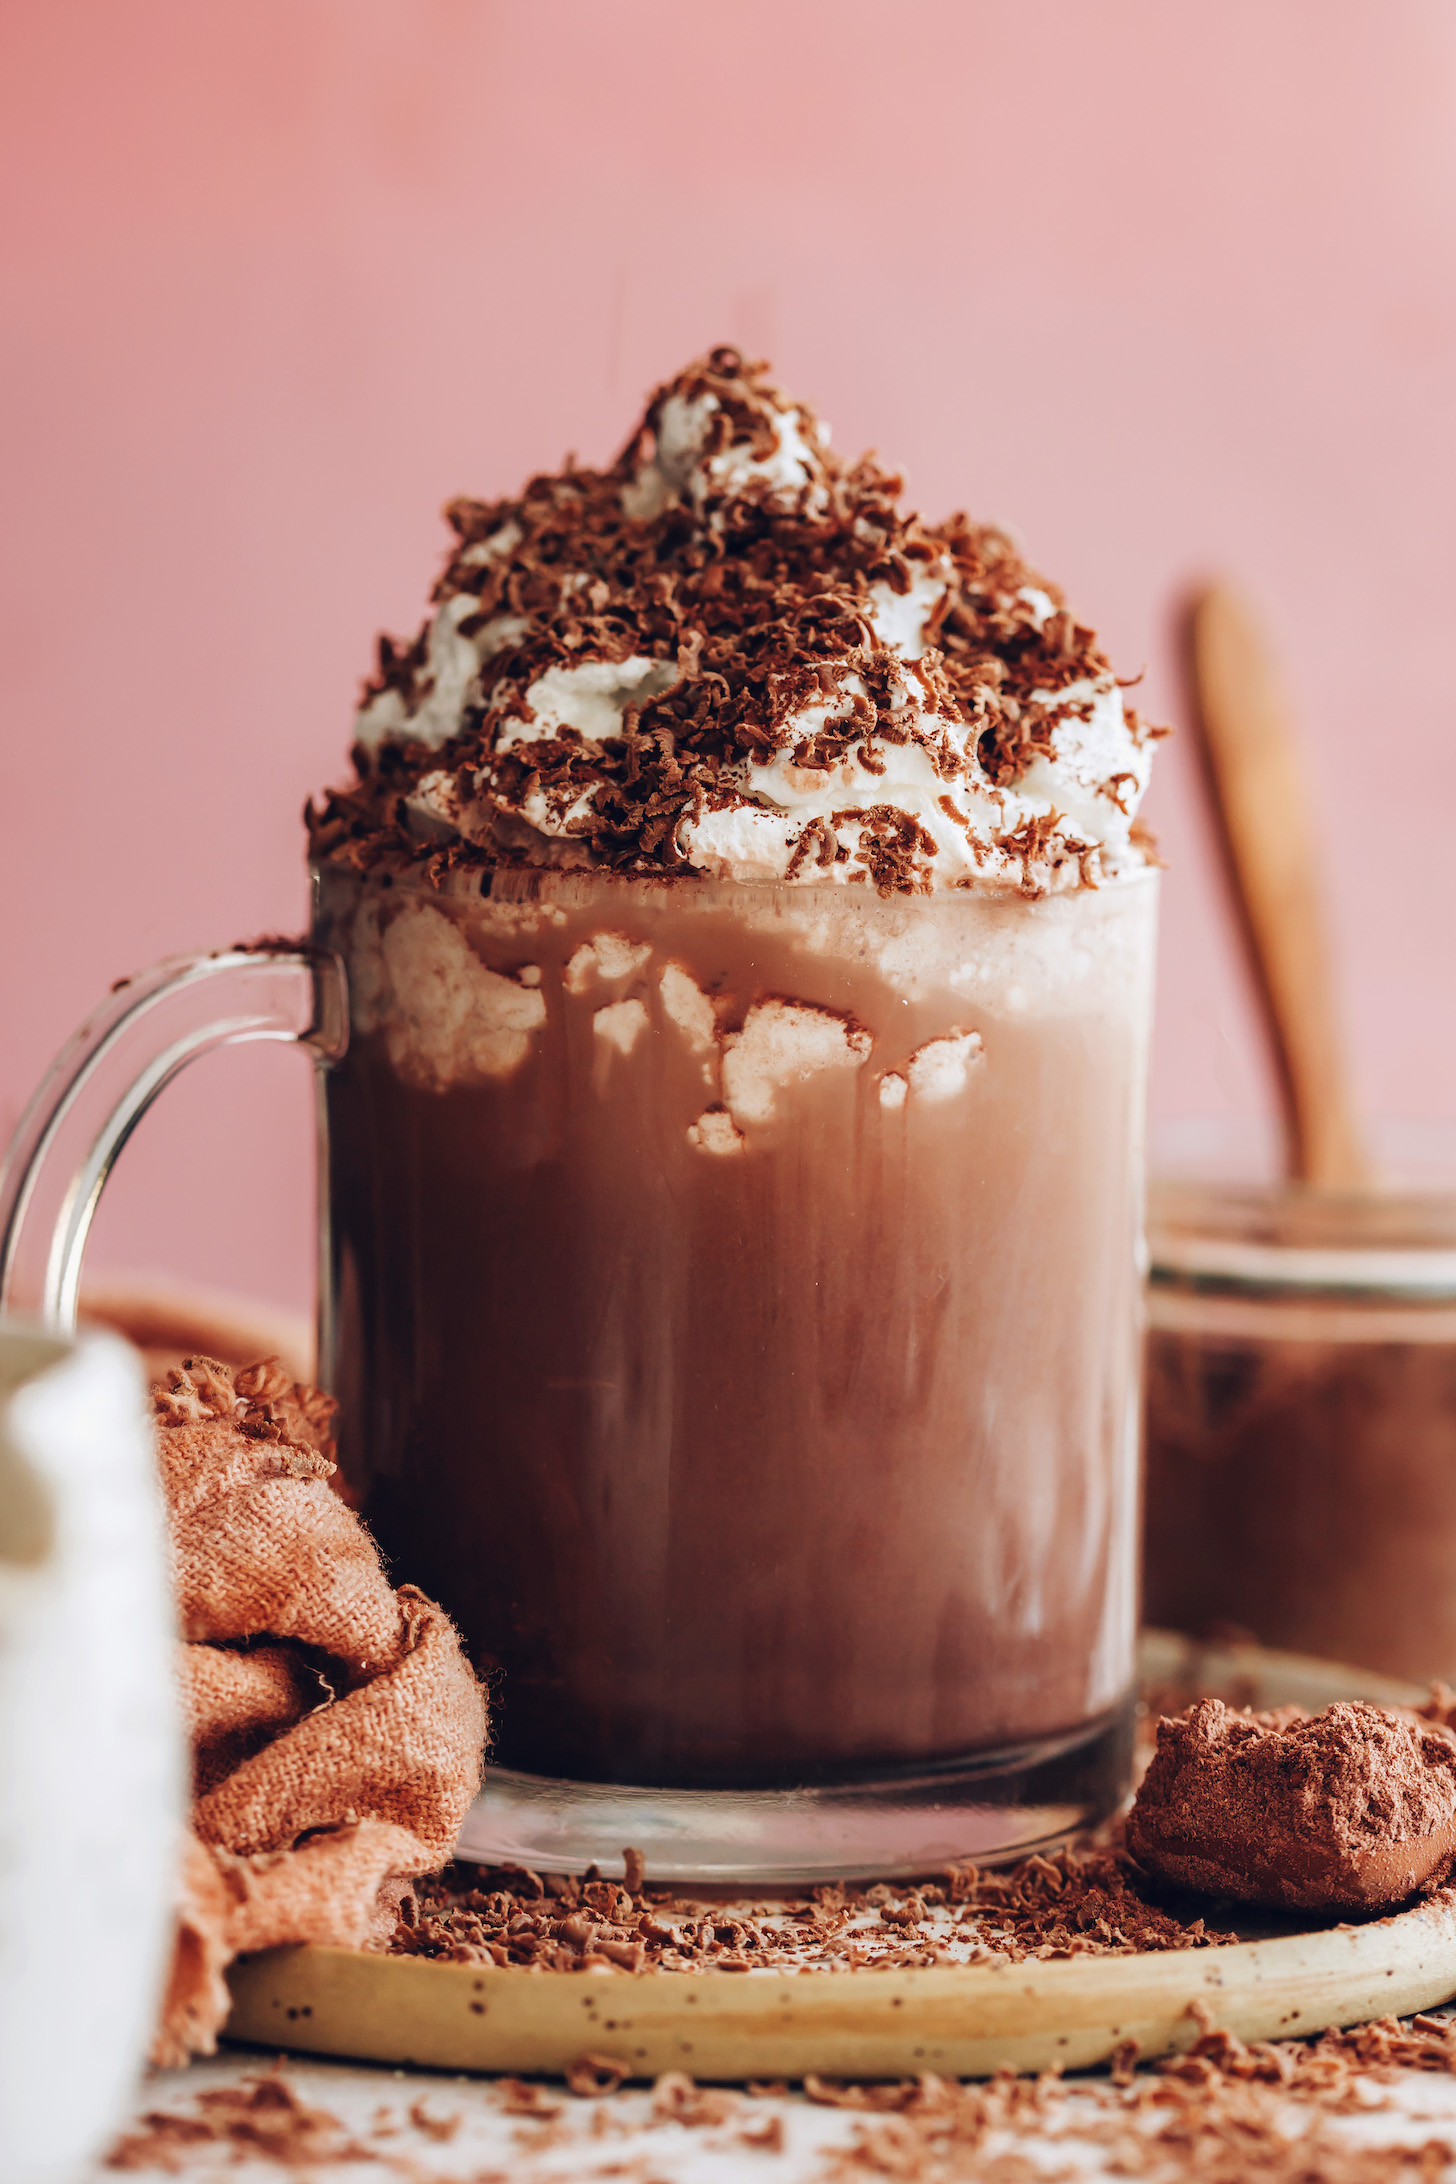 Mug of dairy-free hot chocolate topped with coconut whipped cream